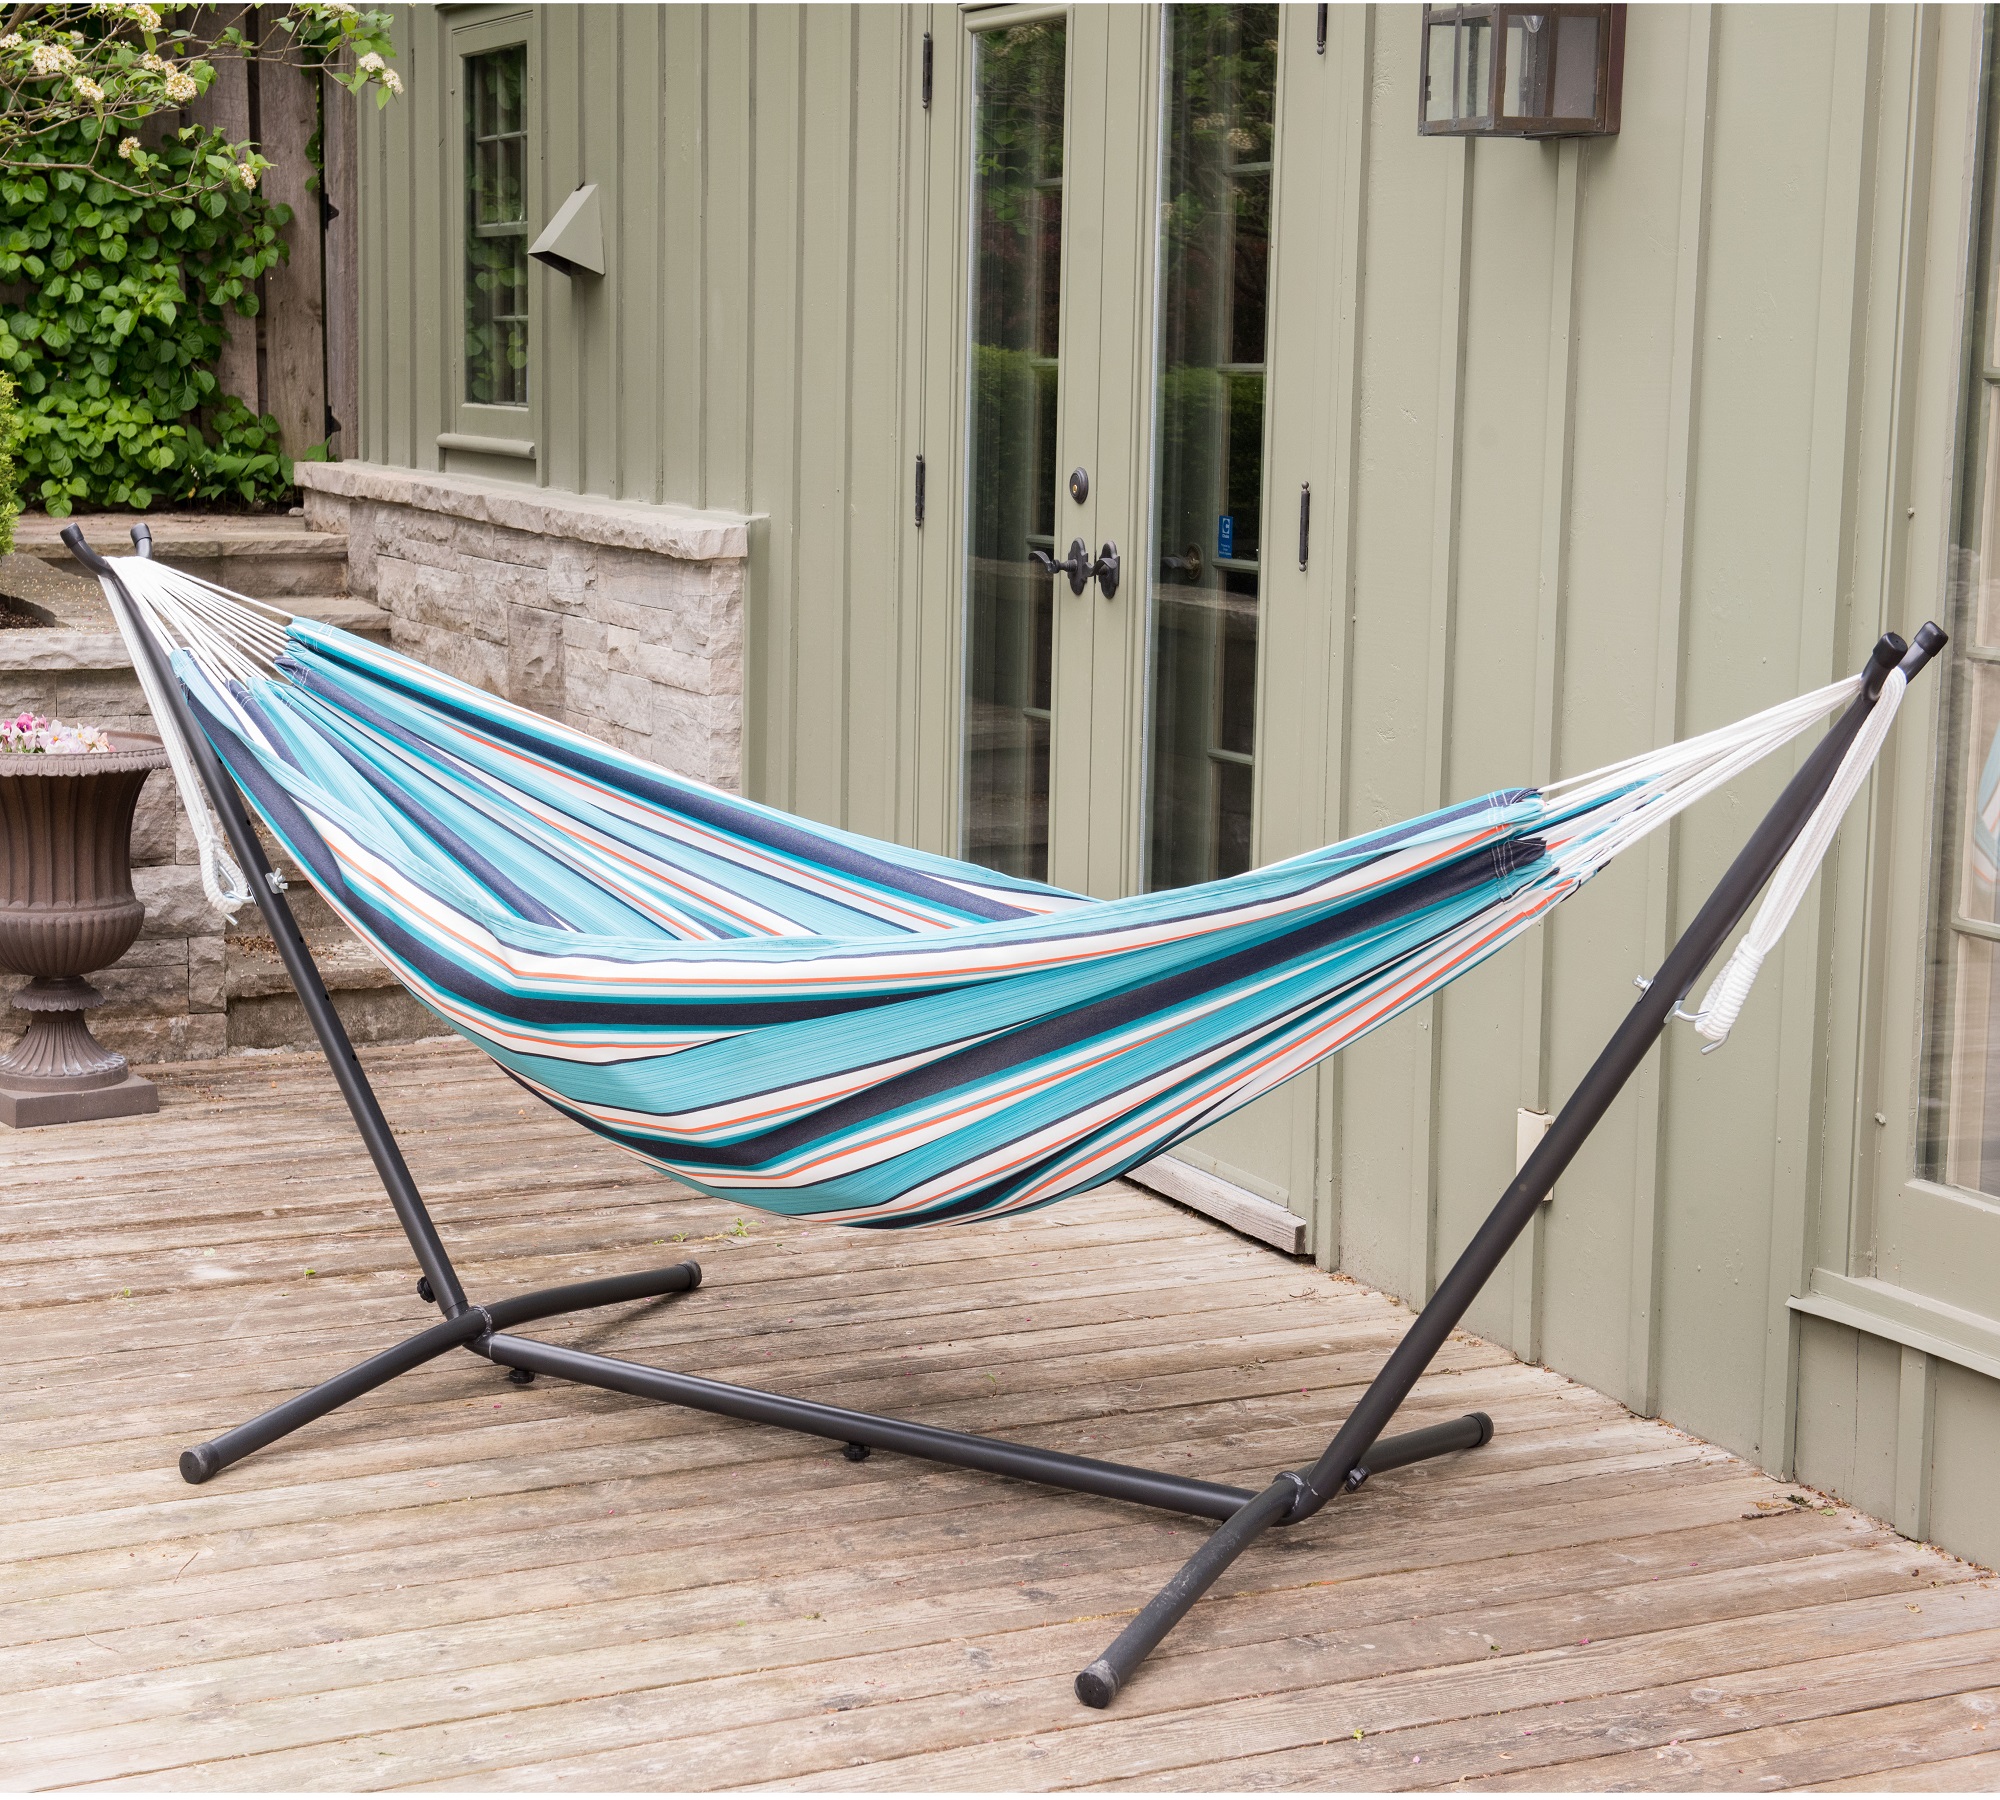 The Hamptons Collection 110” Blue and White Striped Sunbrella Brazilian Style Hammock with Stand